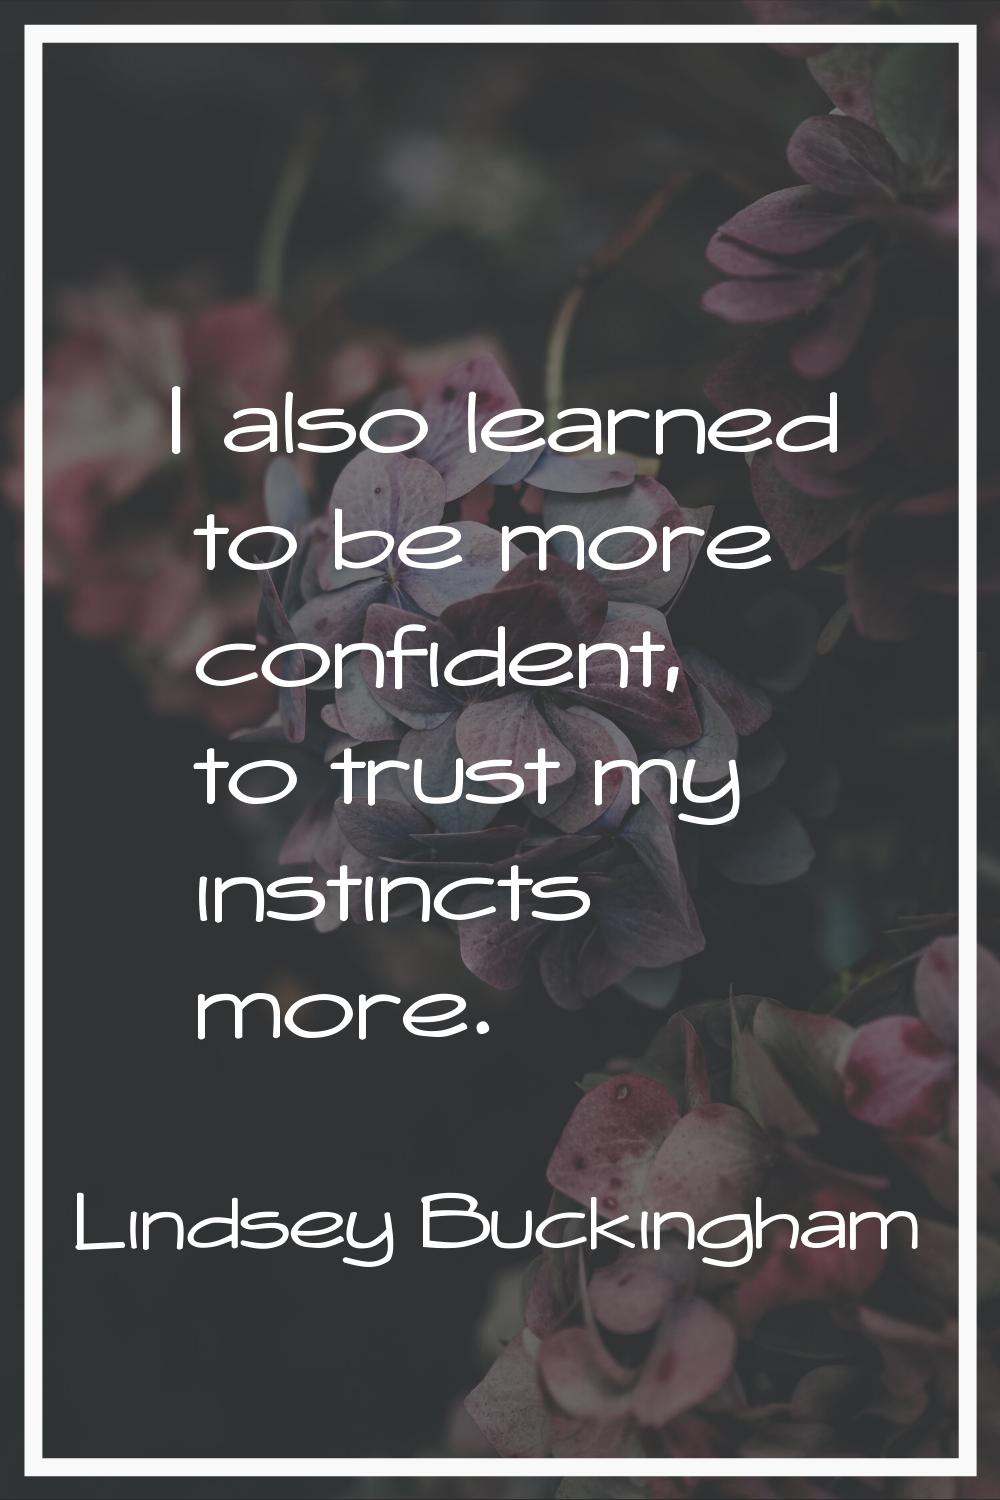 I also learned to be more confident, to trust my instincts more.